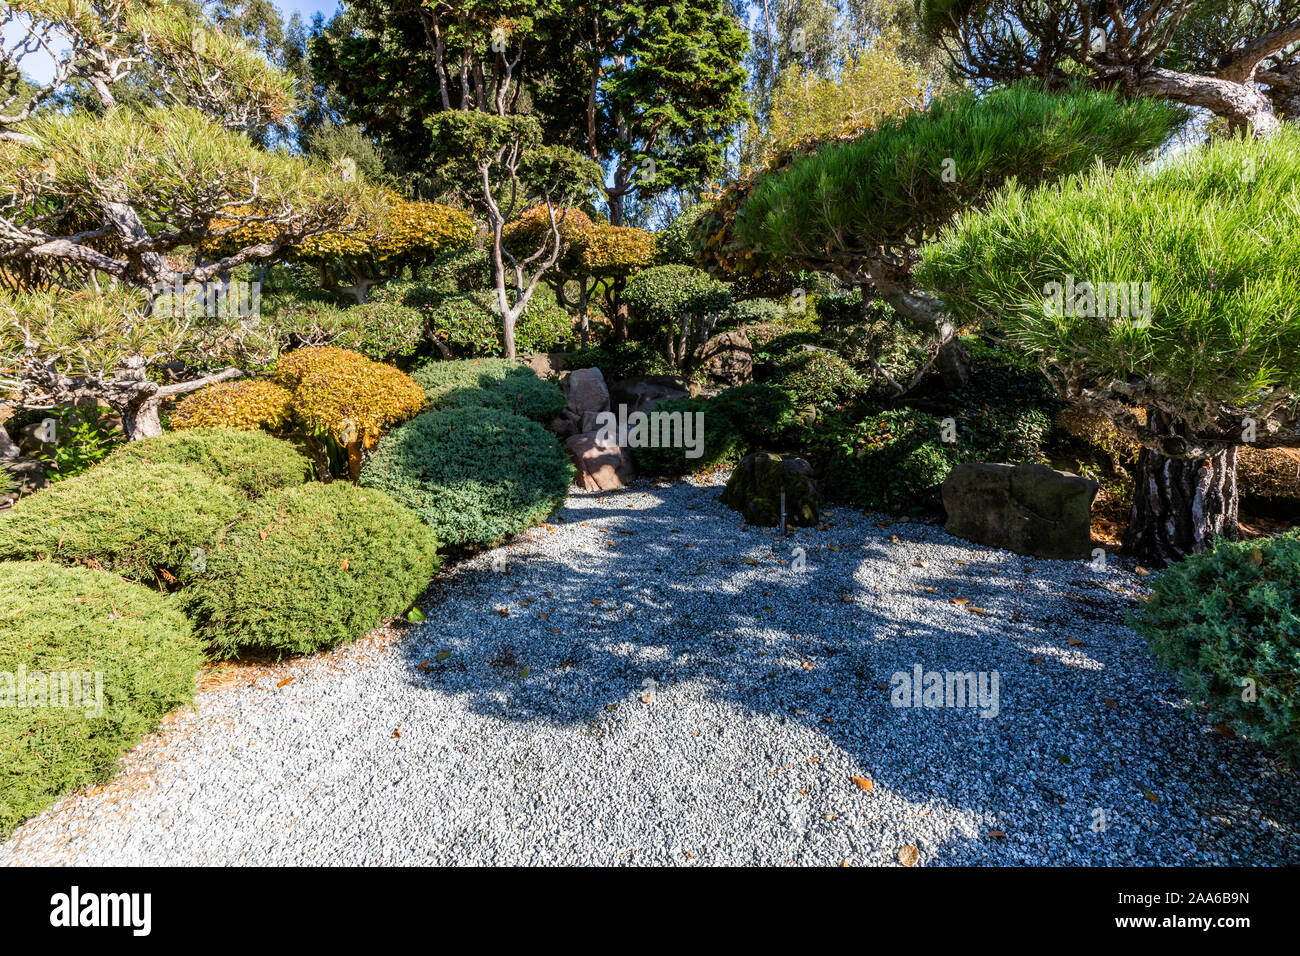 The Hayward Japanese Garden Is One Of The Oldest Japanese Gardens